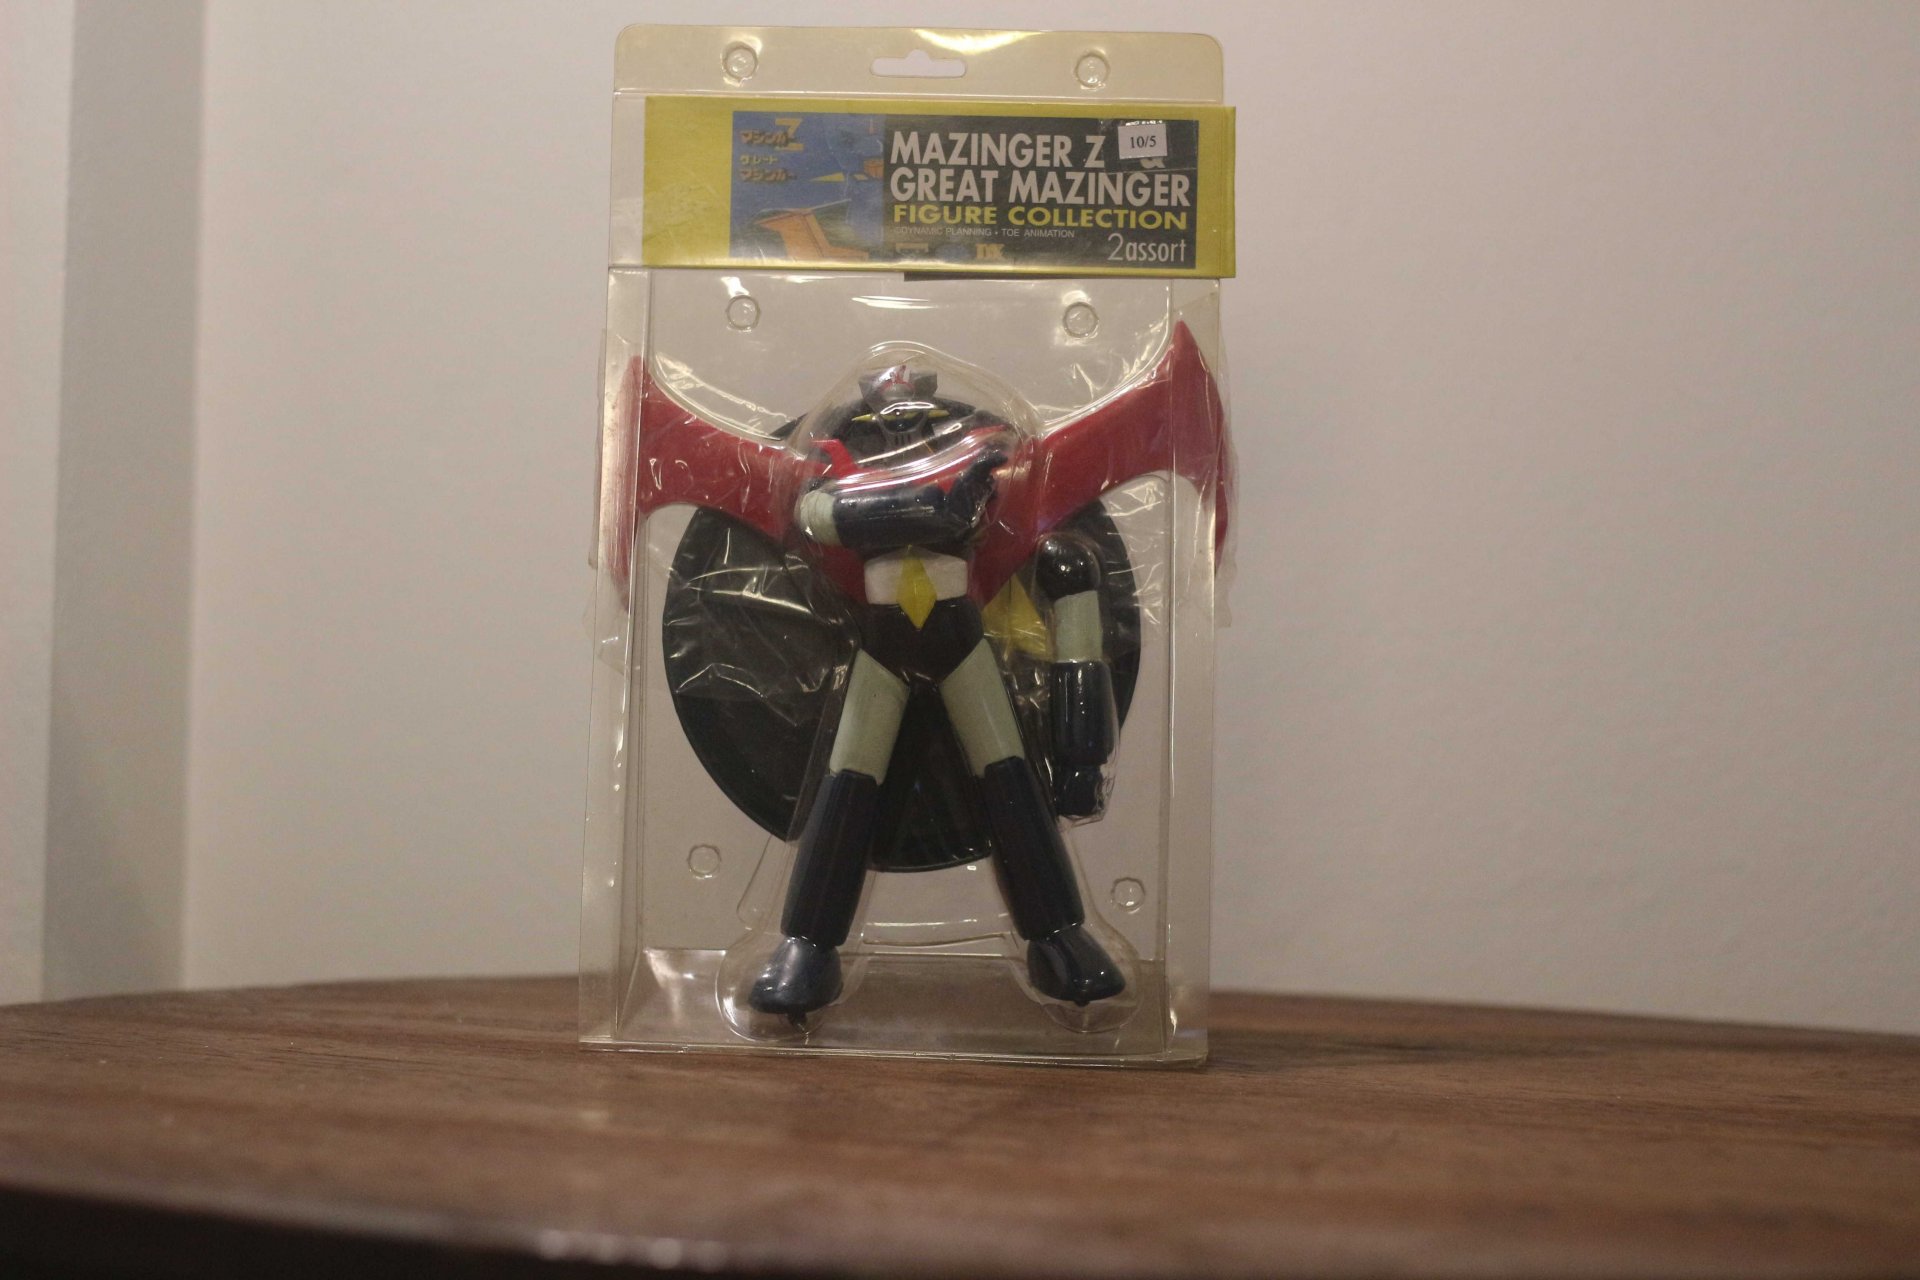 Mazinger Z Great Mazinger Figure Collection